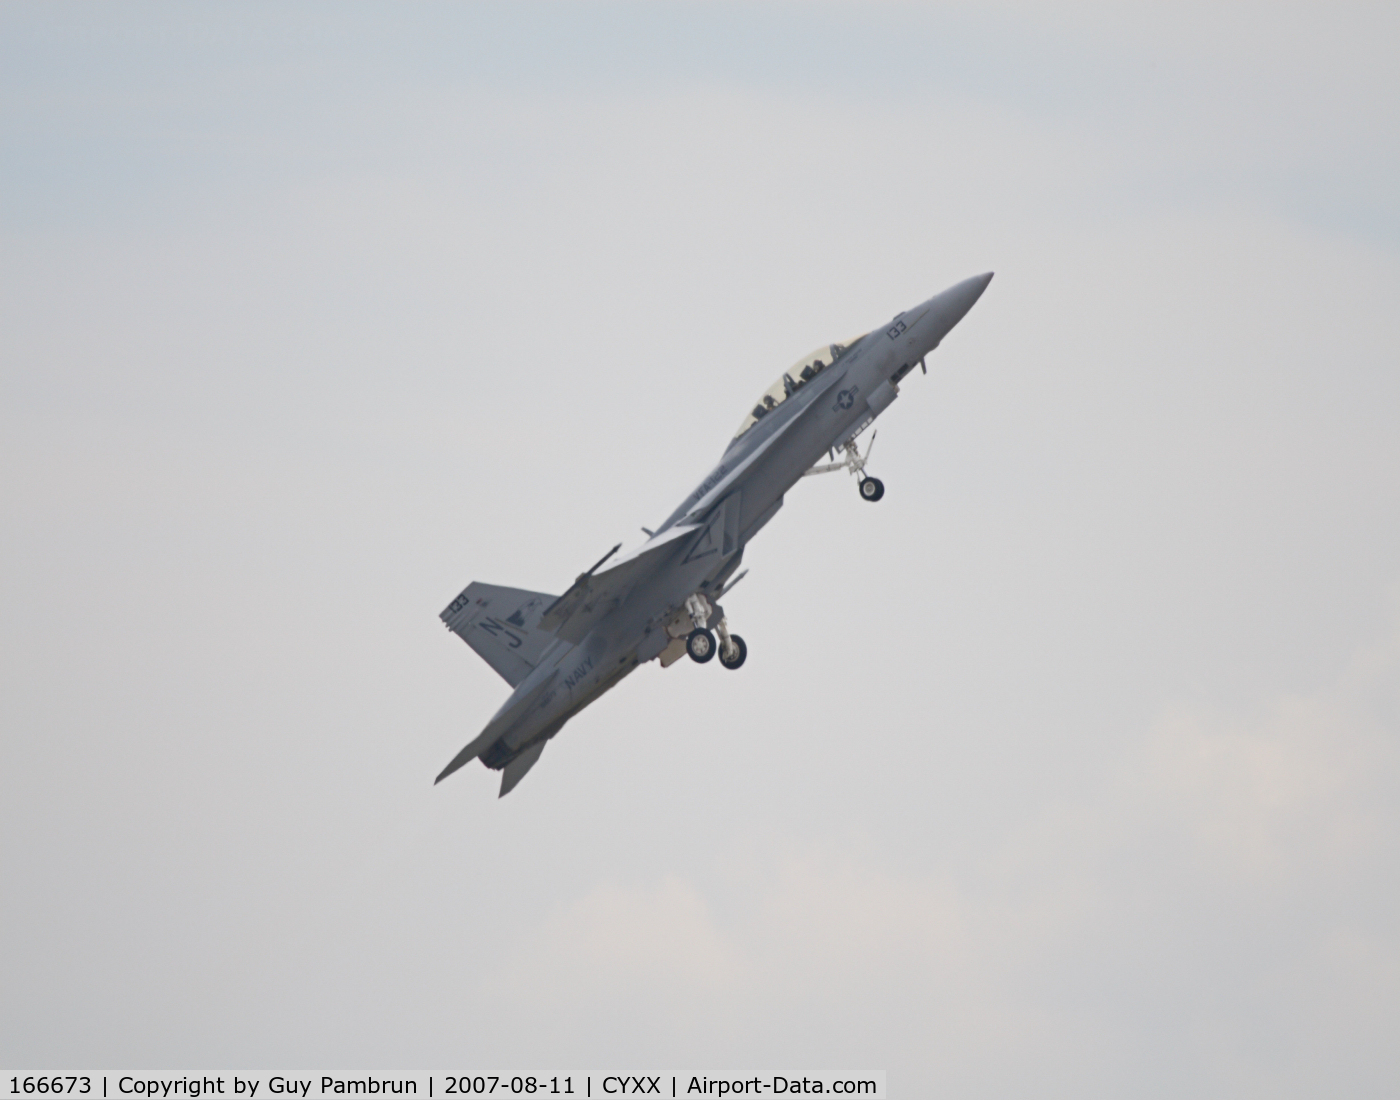 166673, Boeing F/A-18F Super Hornet C/N F151, Slow dirty fly-by